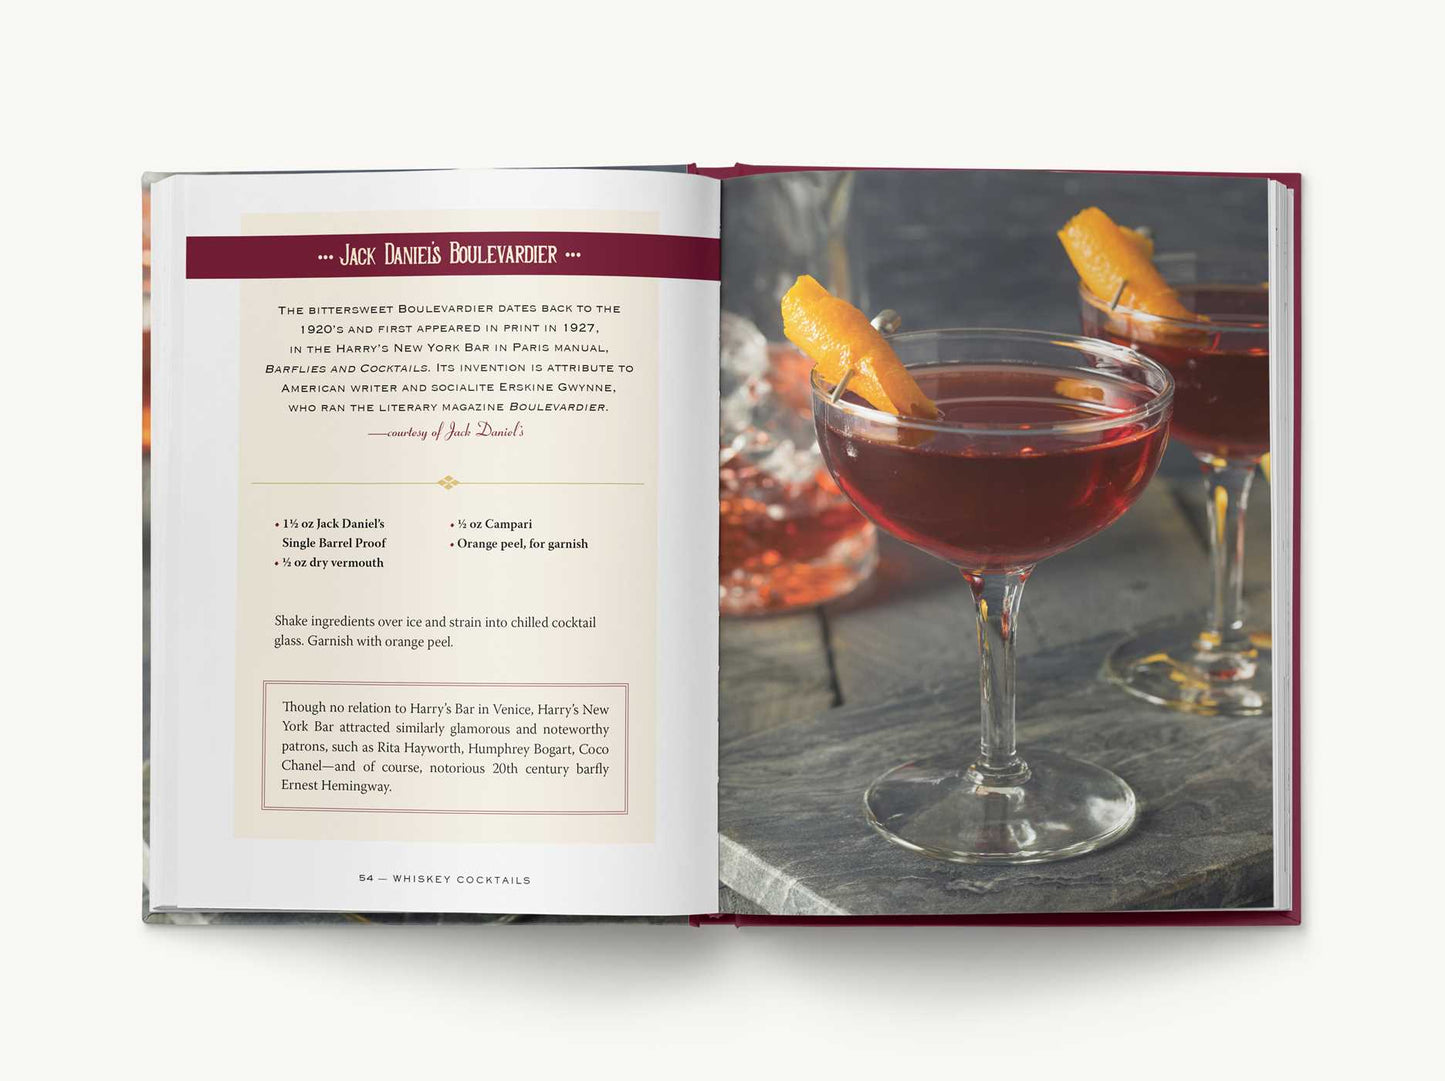 Whiskey Cocktails: A Curated Collection of Over 100 Recipes, From Old School Classics to Modern Originals (Cocktail Recipes, Whisky Scotch Bourbon Drinks, Home Bartender, Mixology, Drinks & Beverages Cookbook)